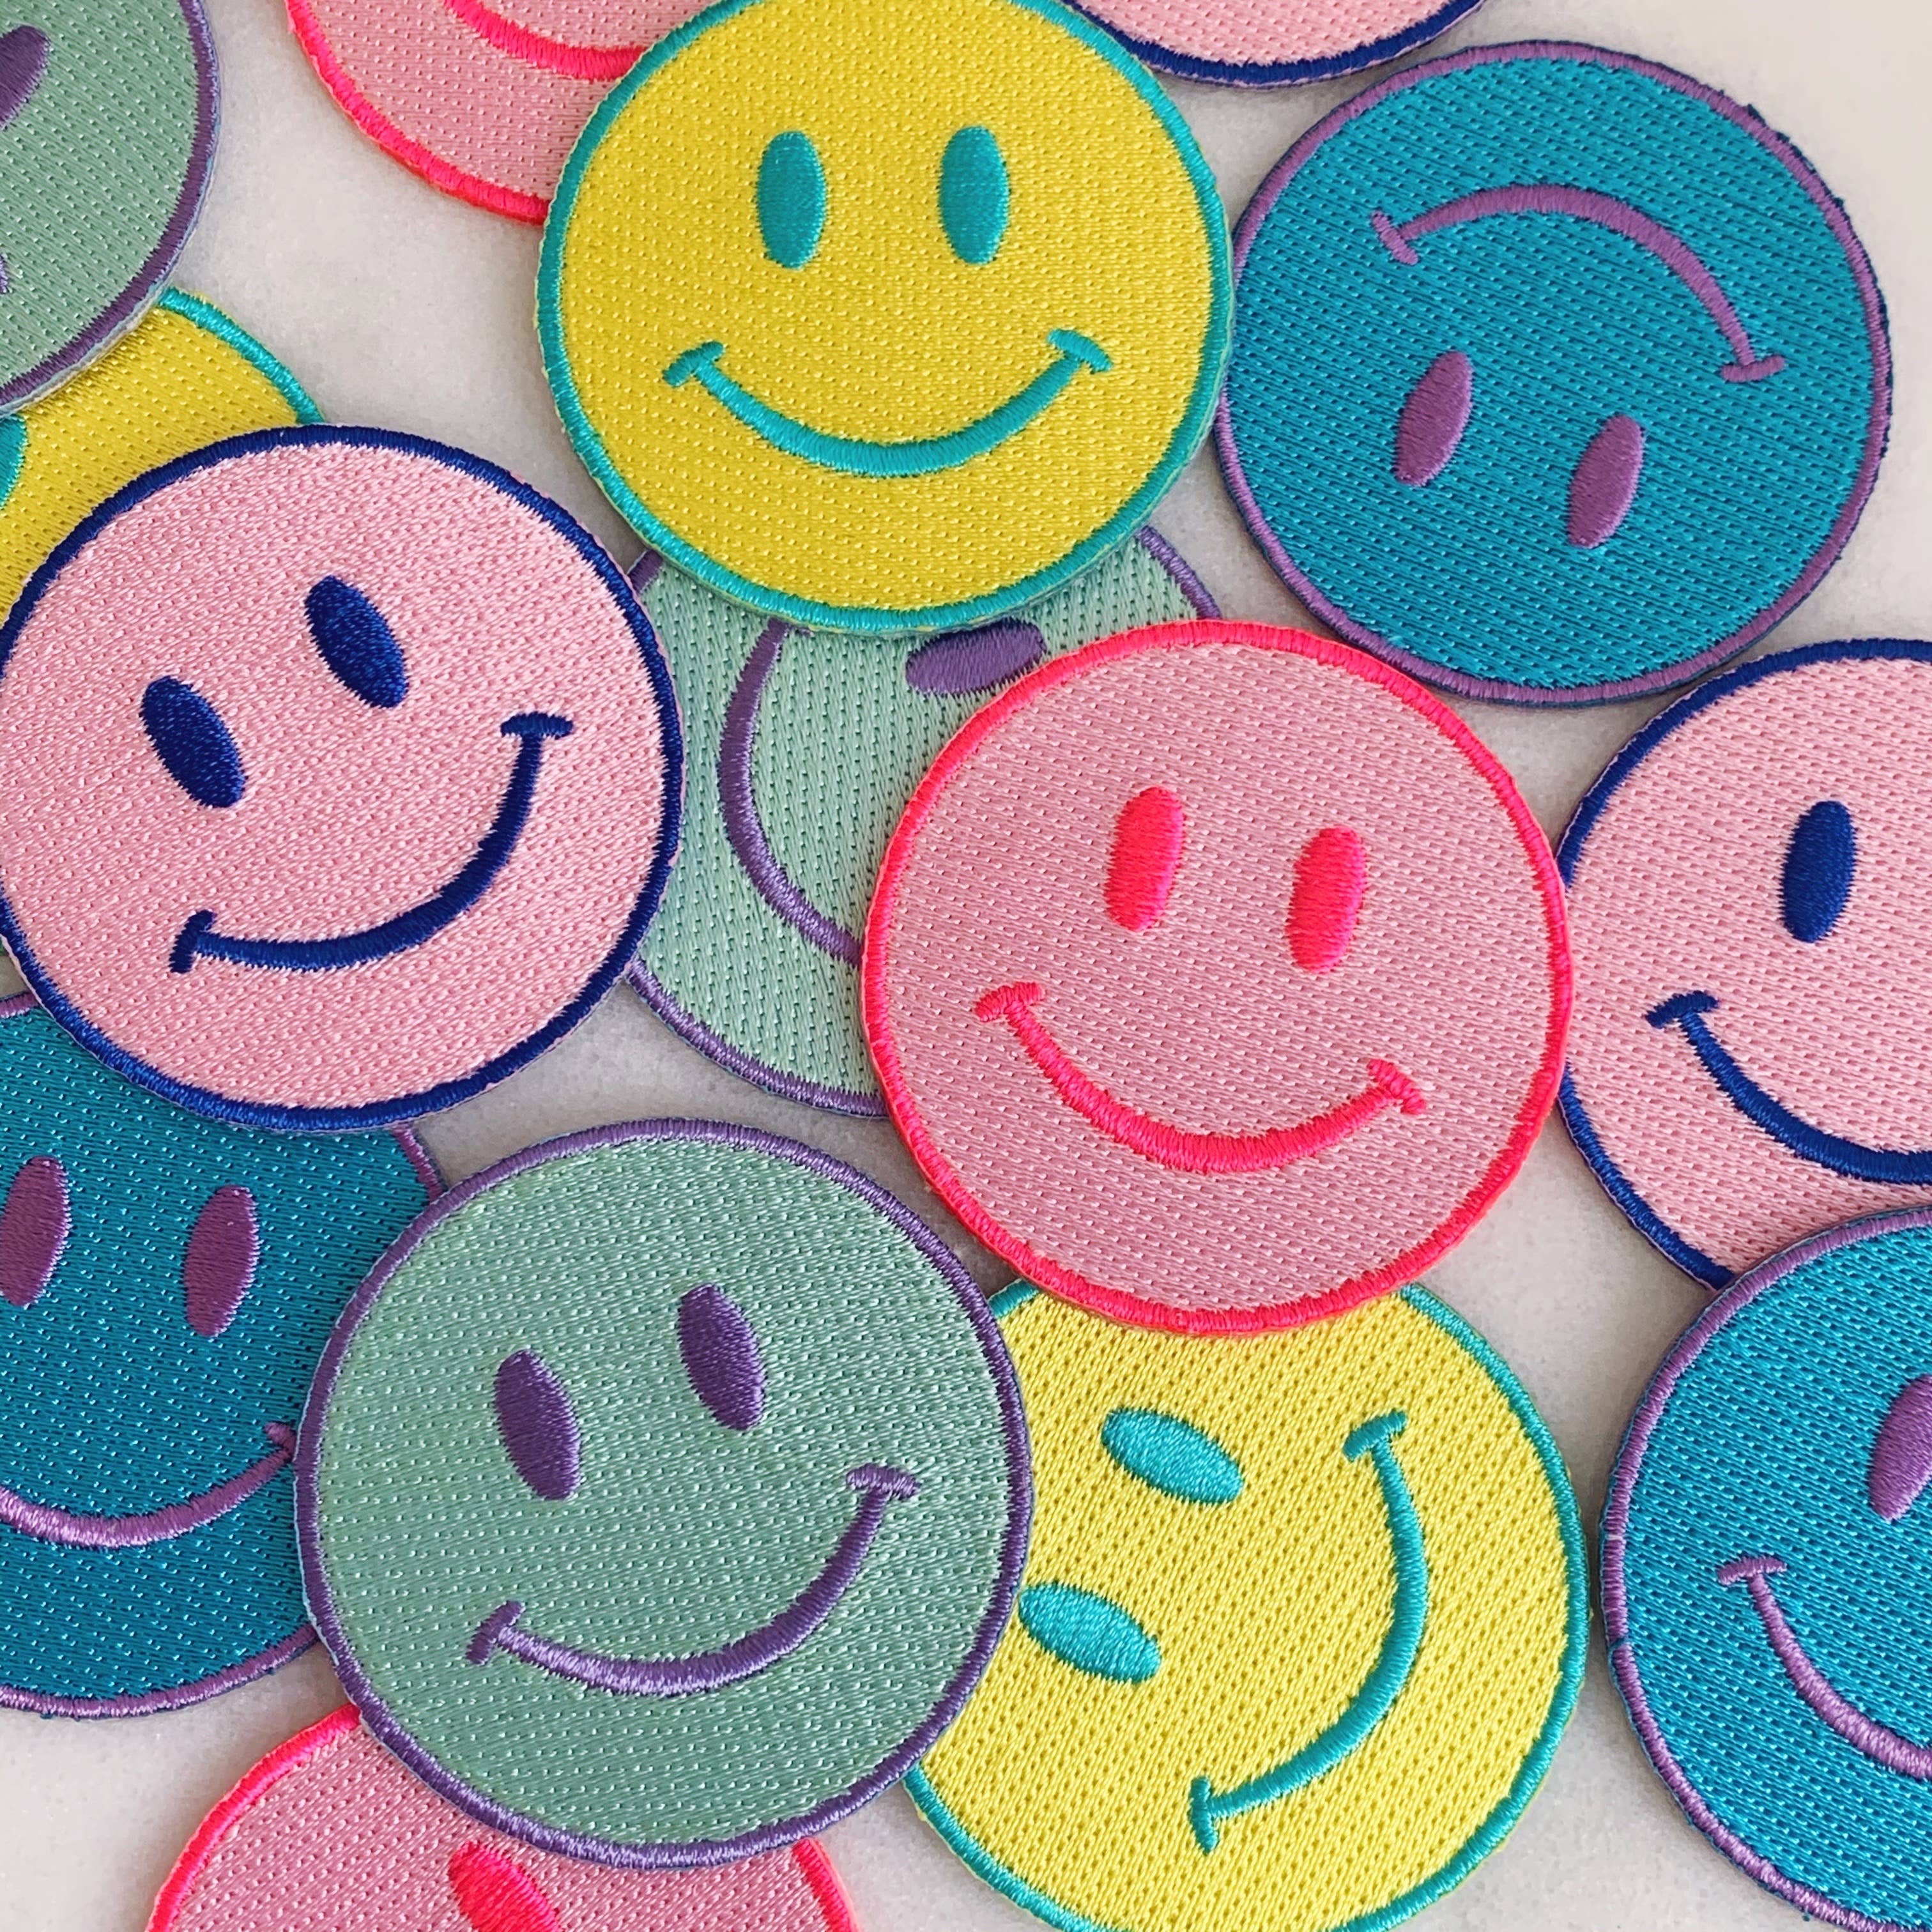 Smiley Face Patch - Pink-Hot Pink, Yellow, Blue, Pink-Blue